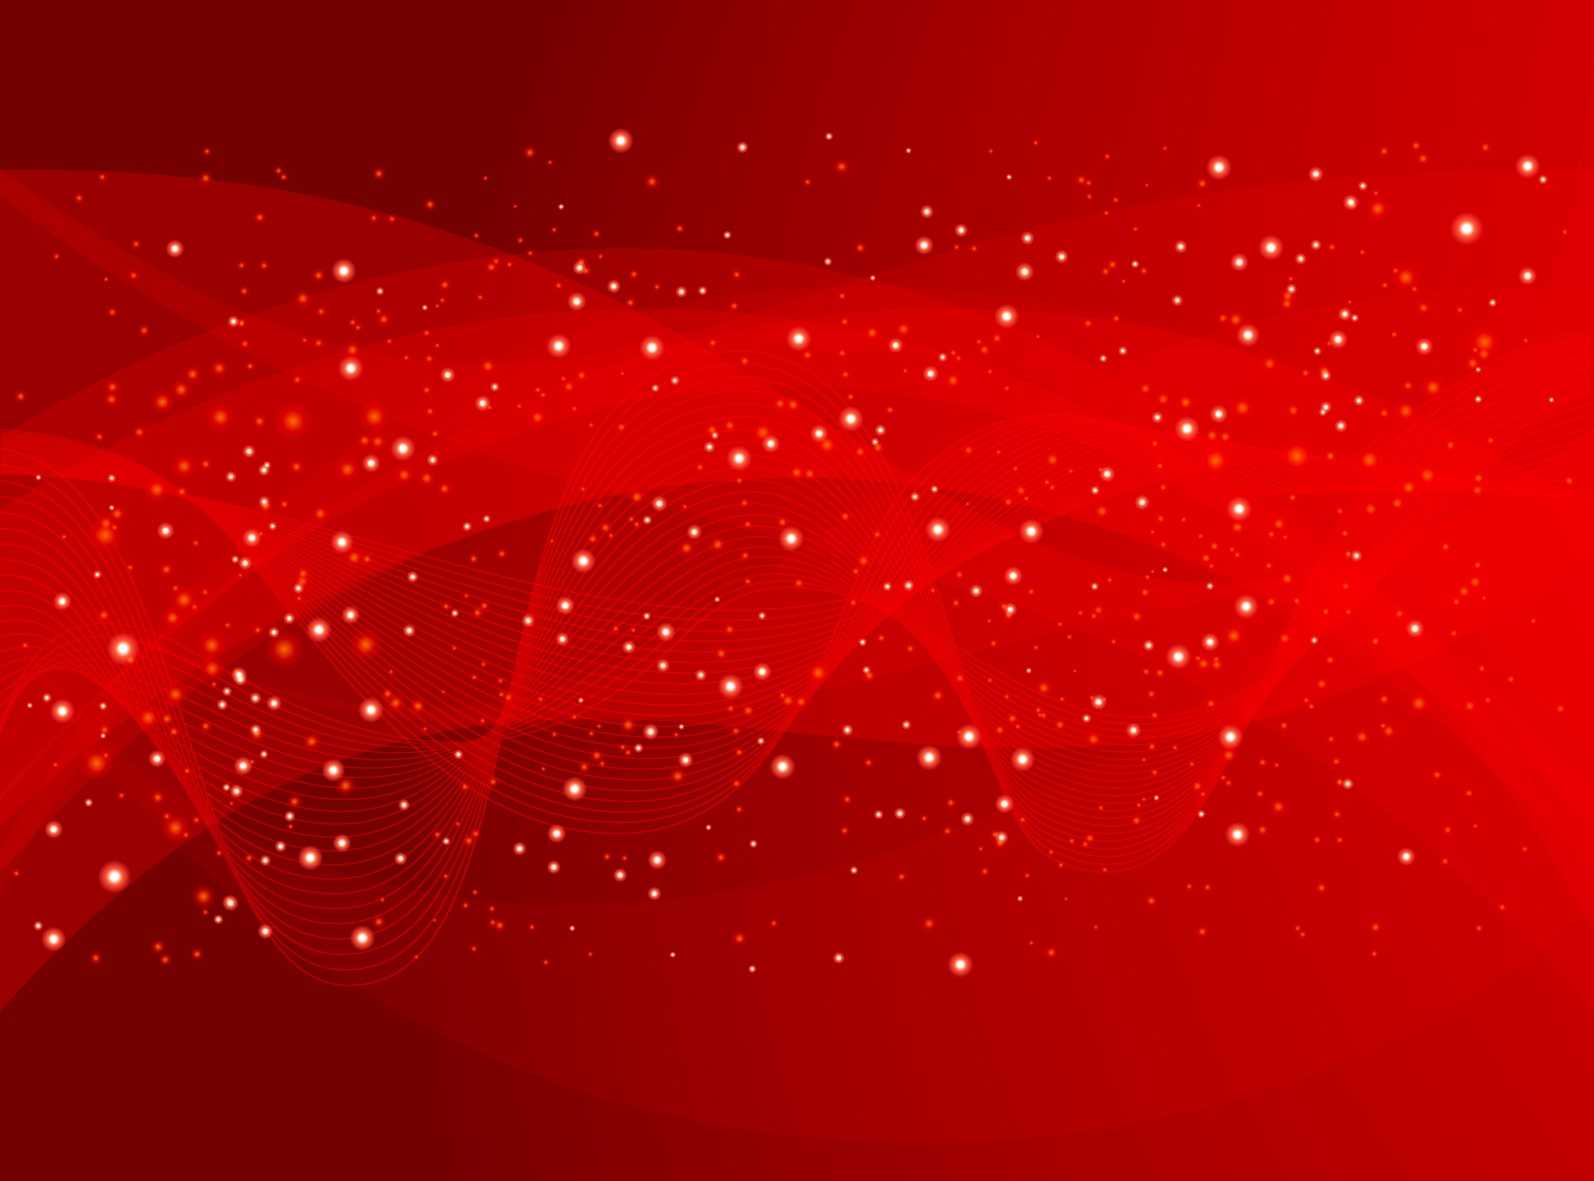 Red Background Photos Download Free Red Background Stock Photos  HD Images